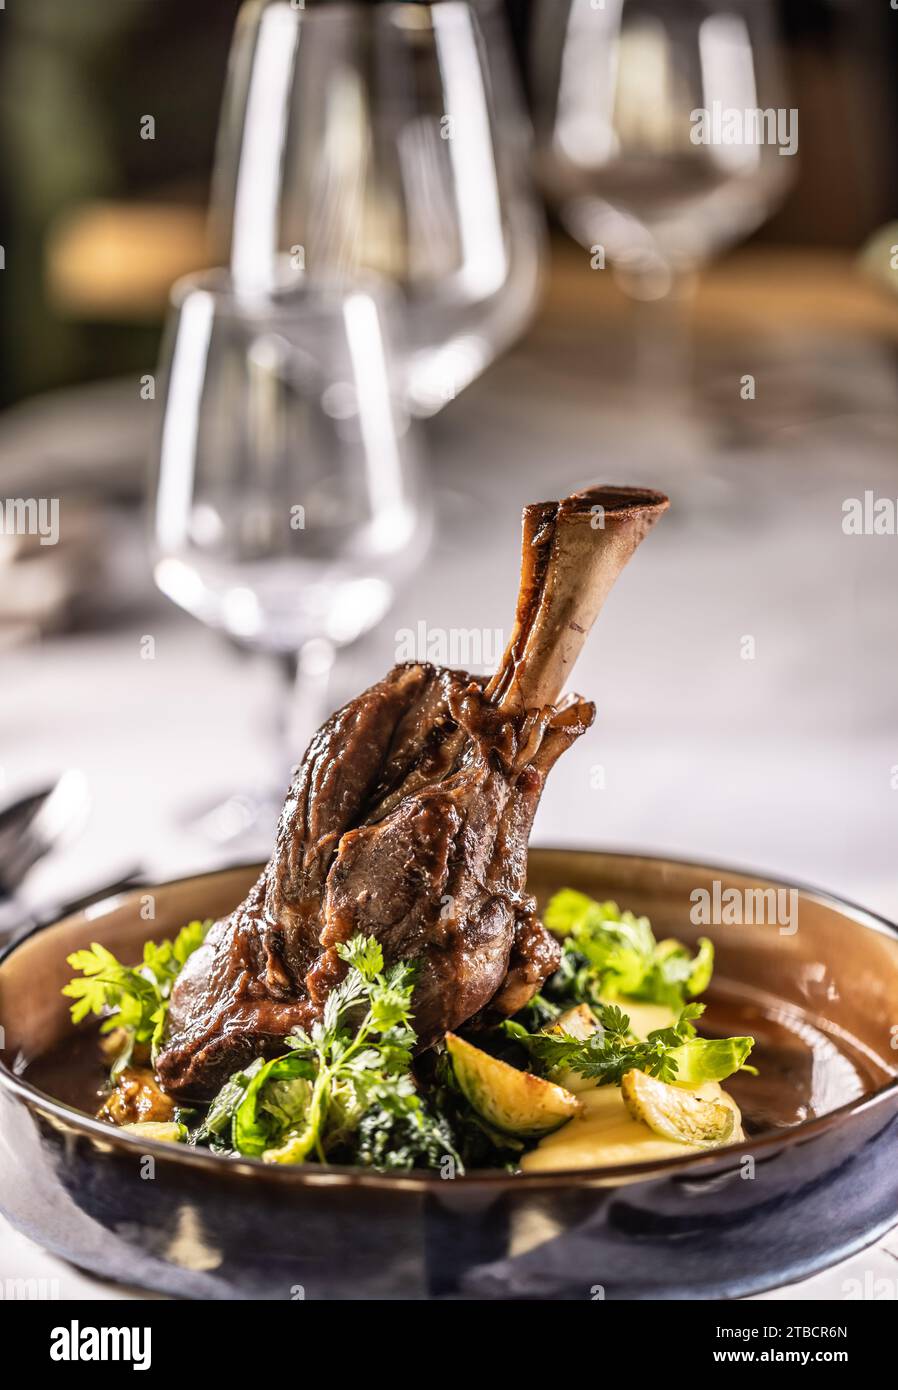 Confit leg of lamb on mashed potatoes with creamy kale, demi glace sauce and herbs in the hotel restaurant. Stock Photo